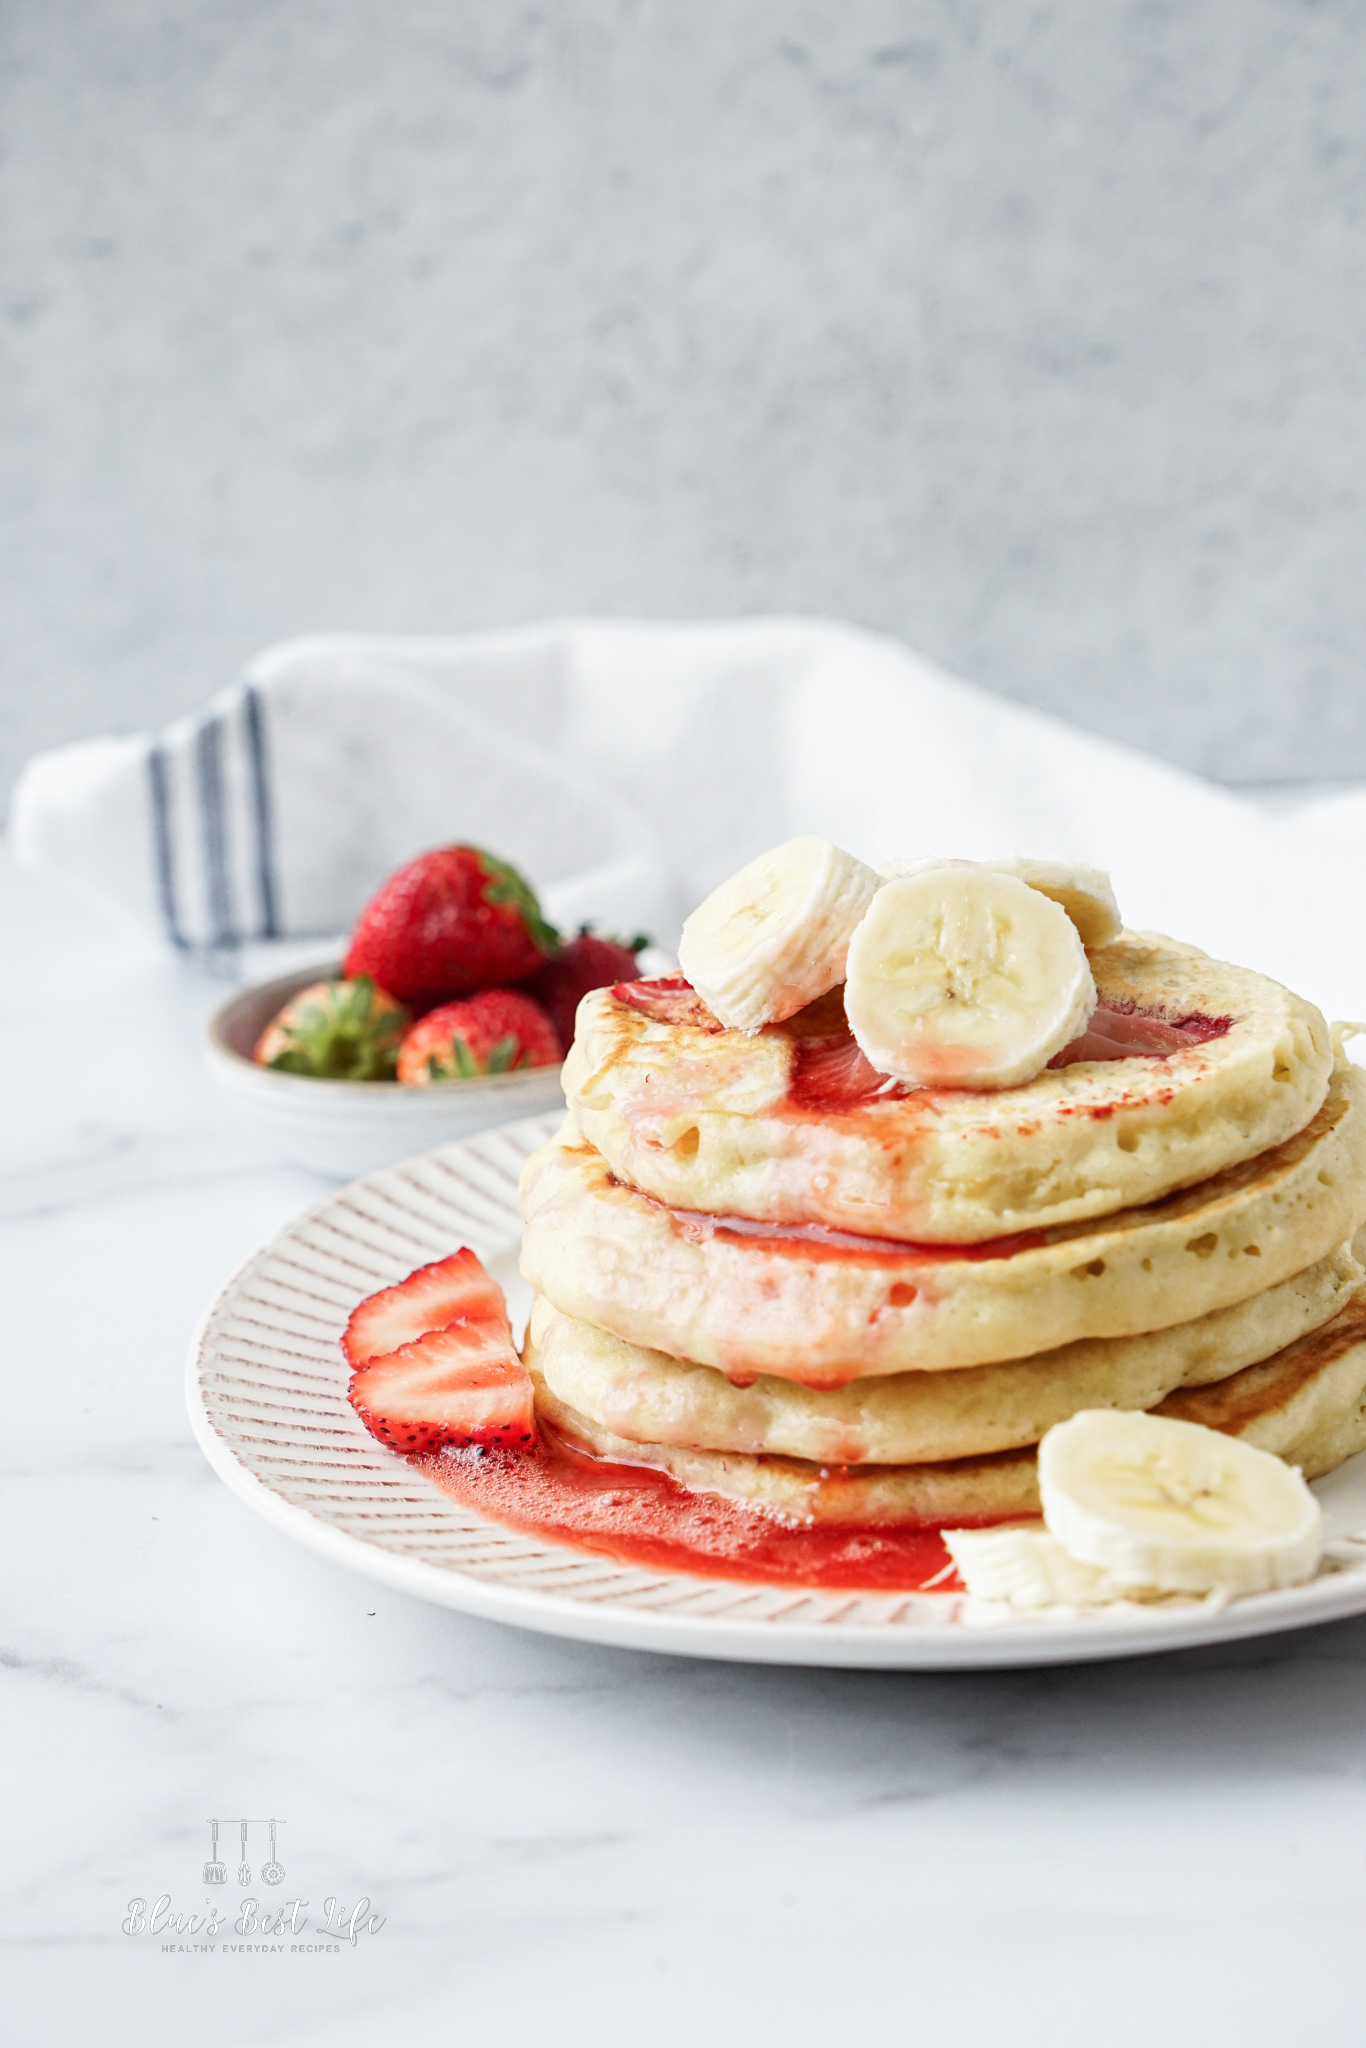 The stack of banana strawberry pancakes.  